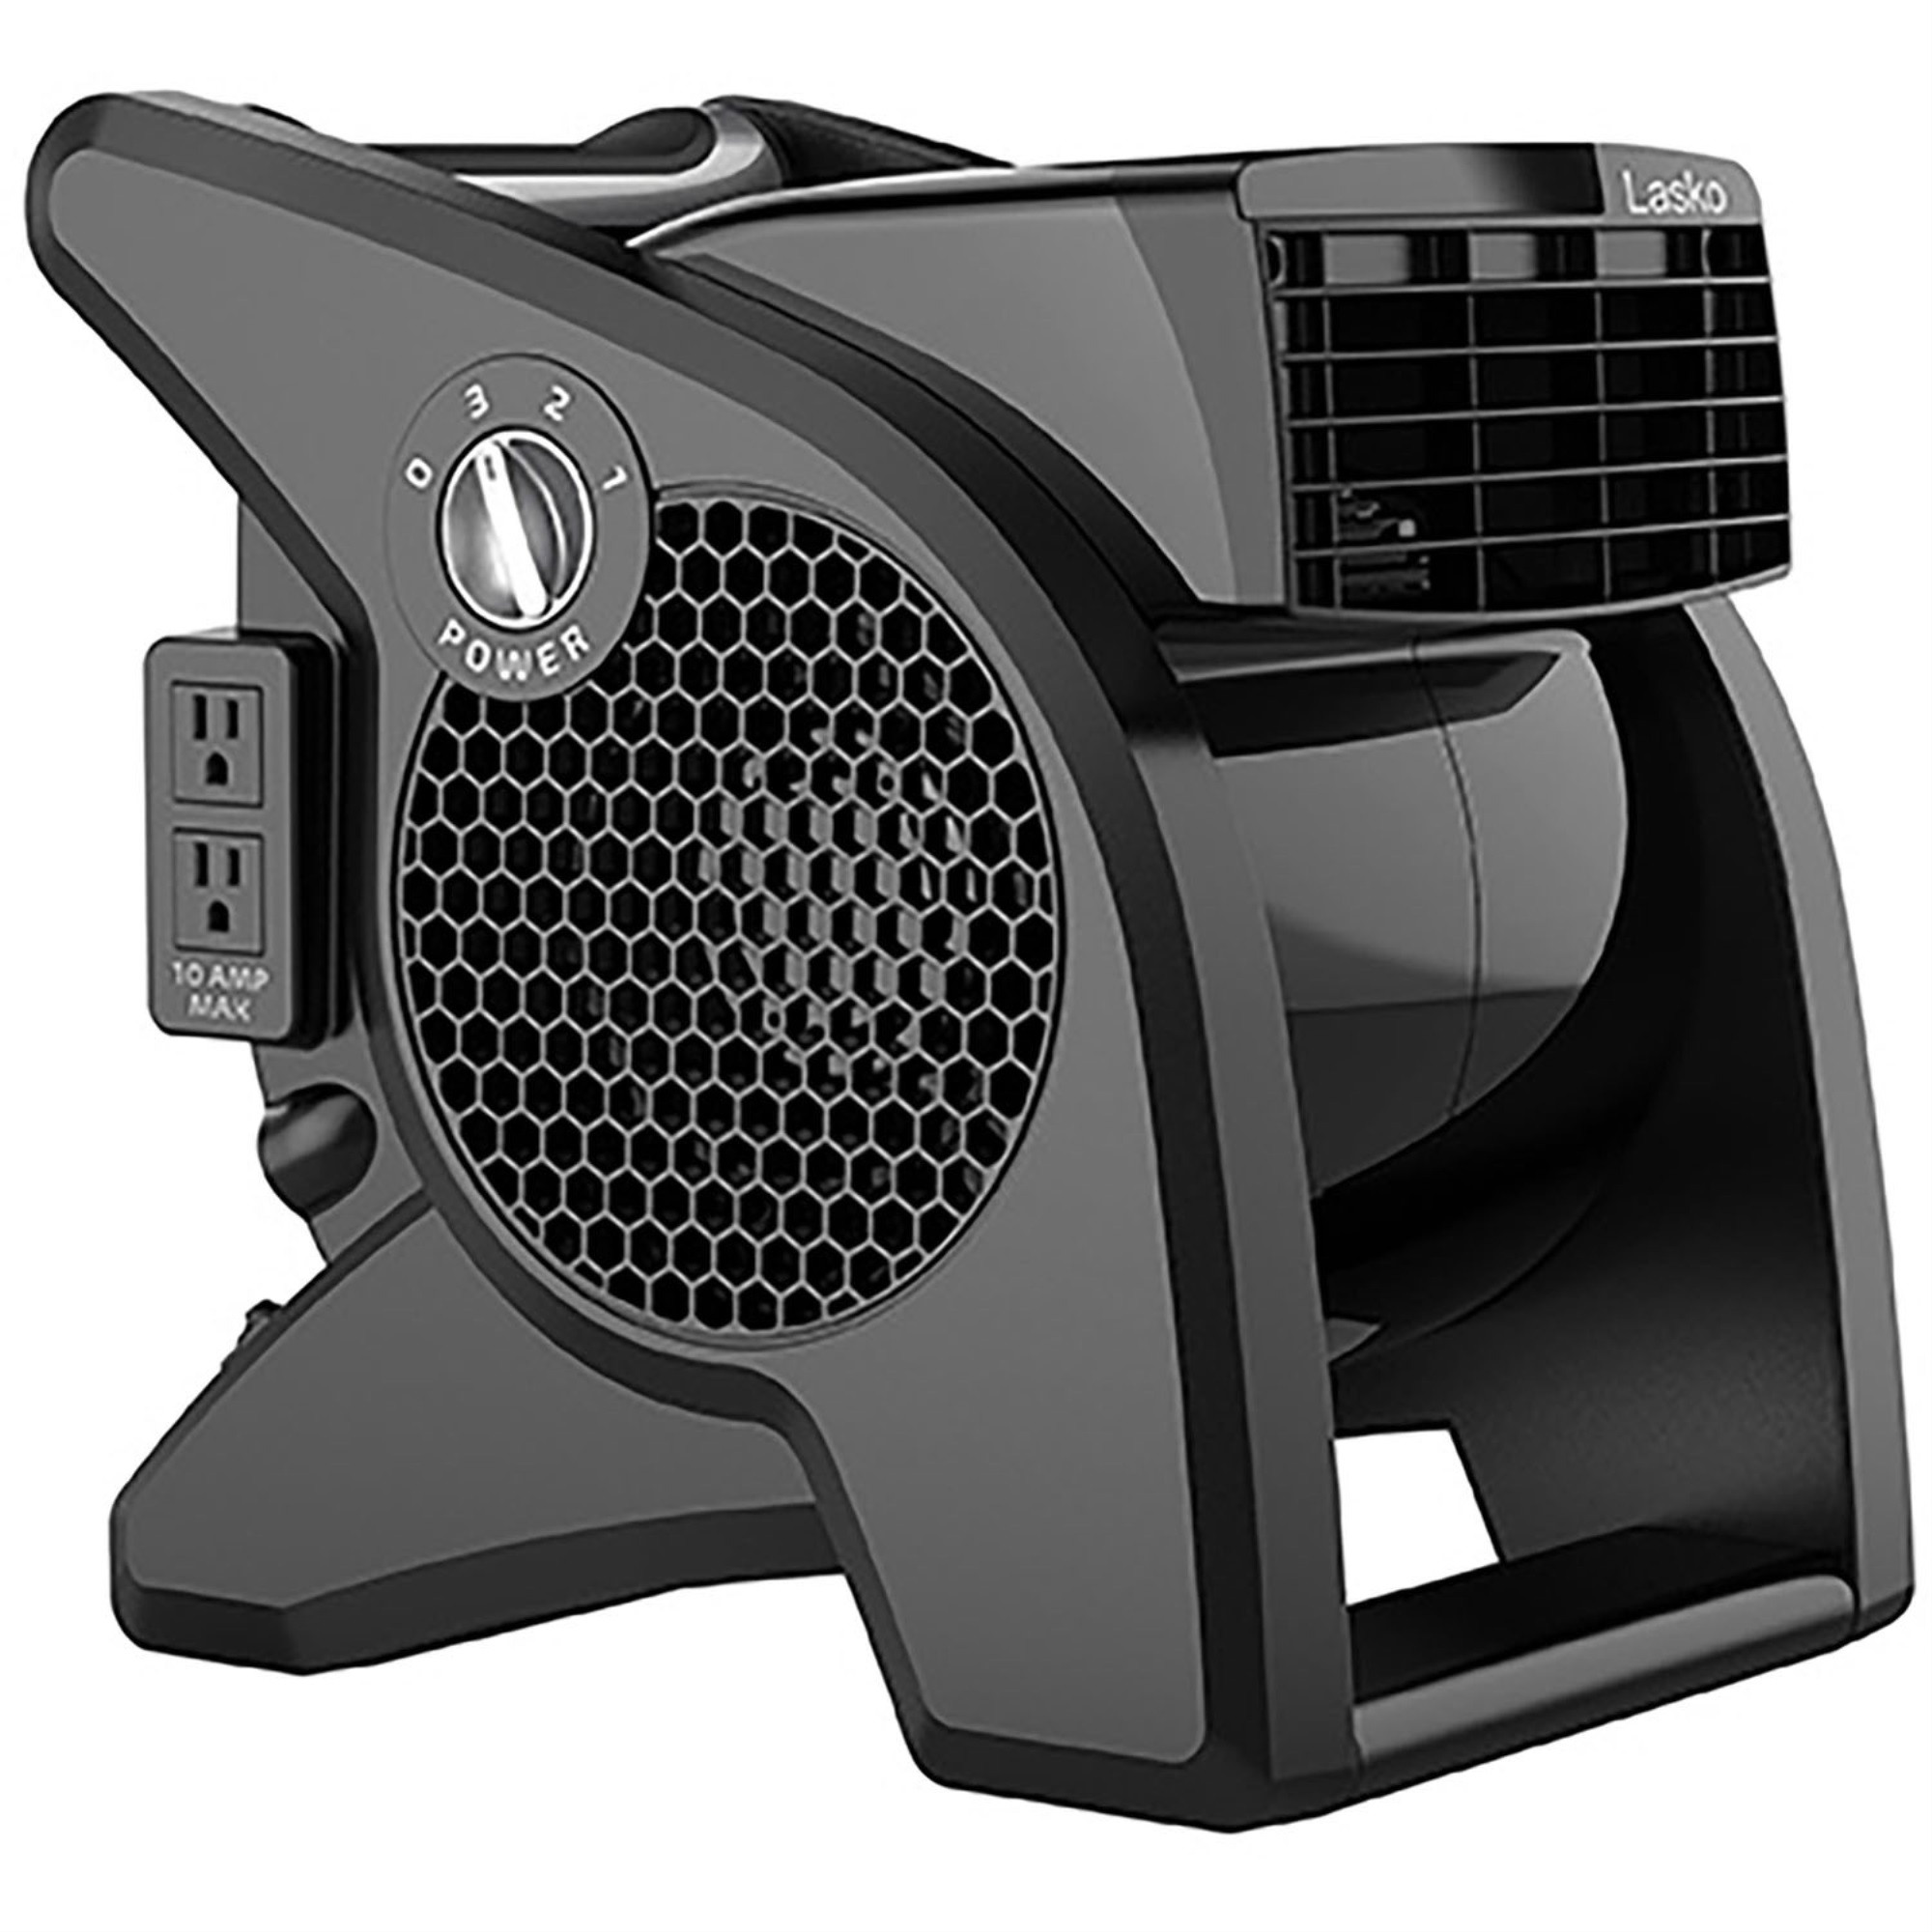 Lasko Products Lasko High Velocity Pro-Performance Pivoting Utility Fan for Cooling, Ventilating, Exhausting and Drying at Home, Job Site and W